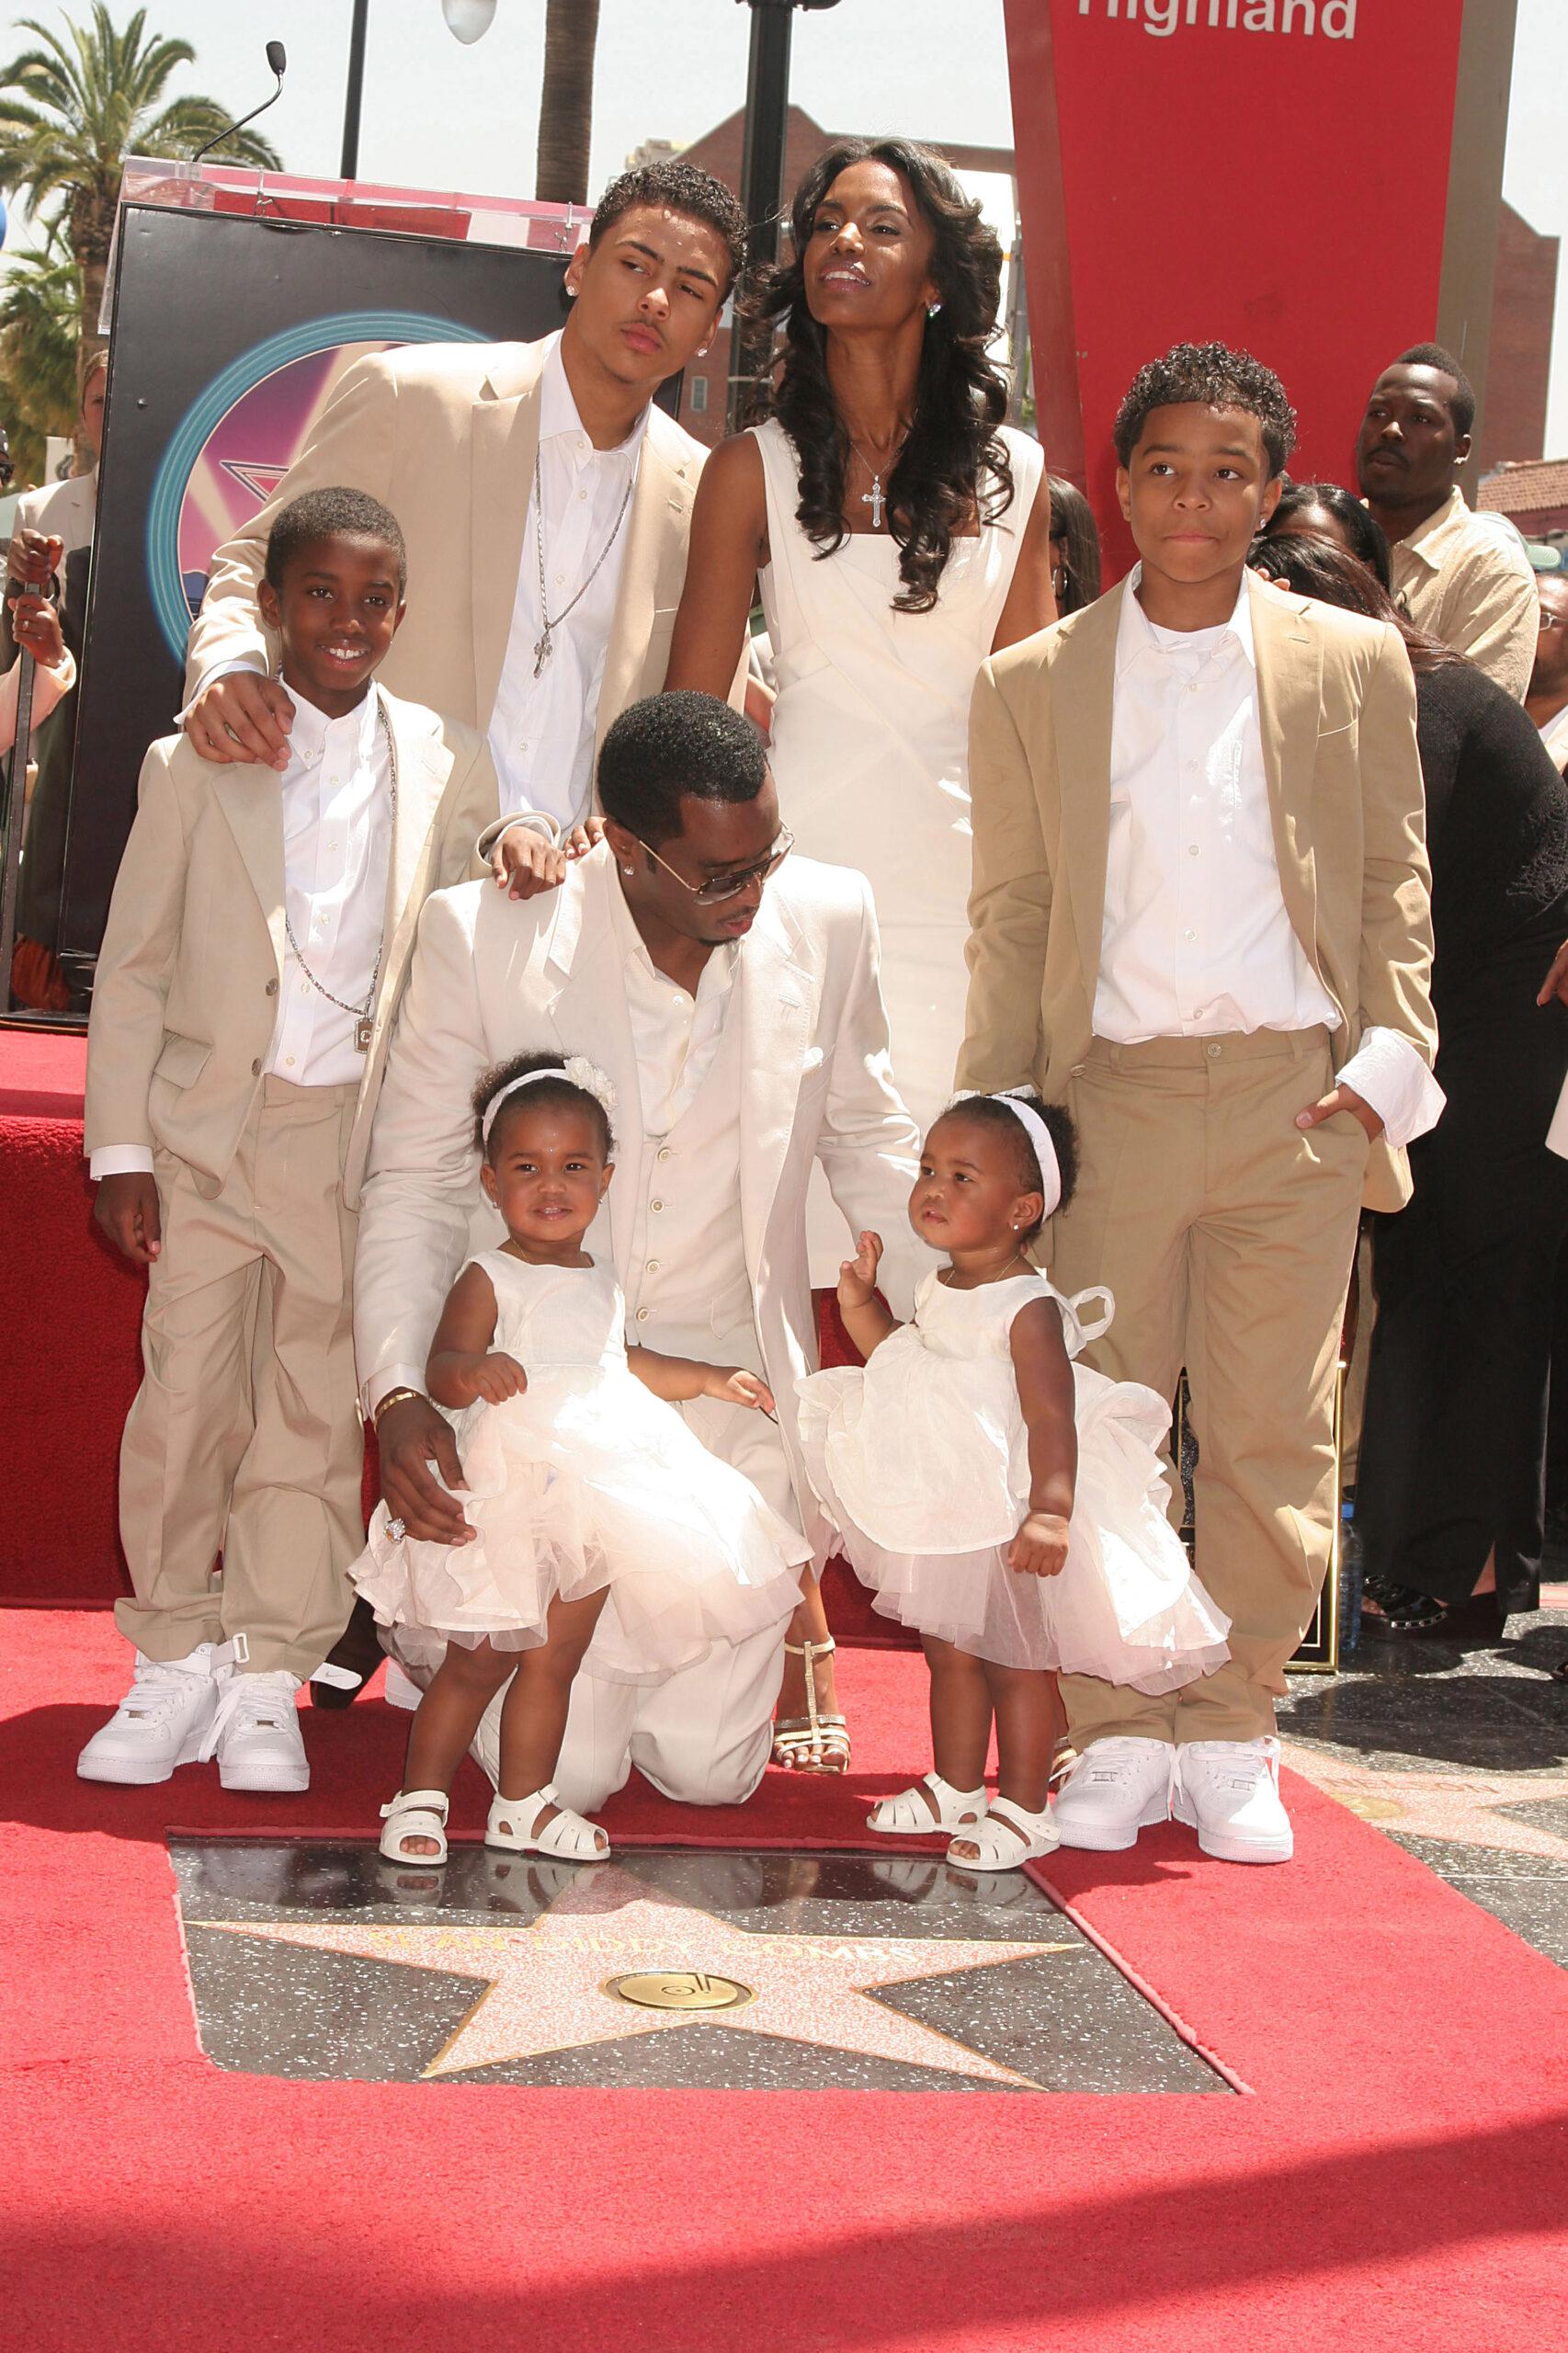 https://theblast.com/326722/diddy-sued-discrimination-nanny-fired-for-being-pregnant/